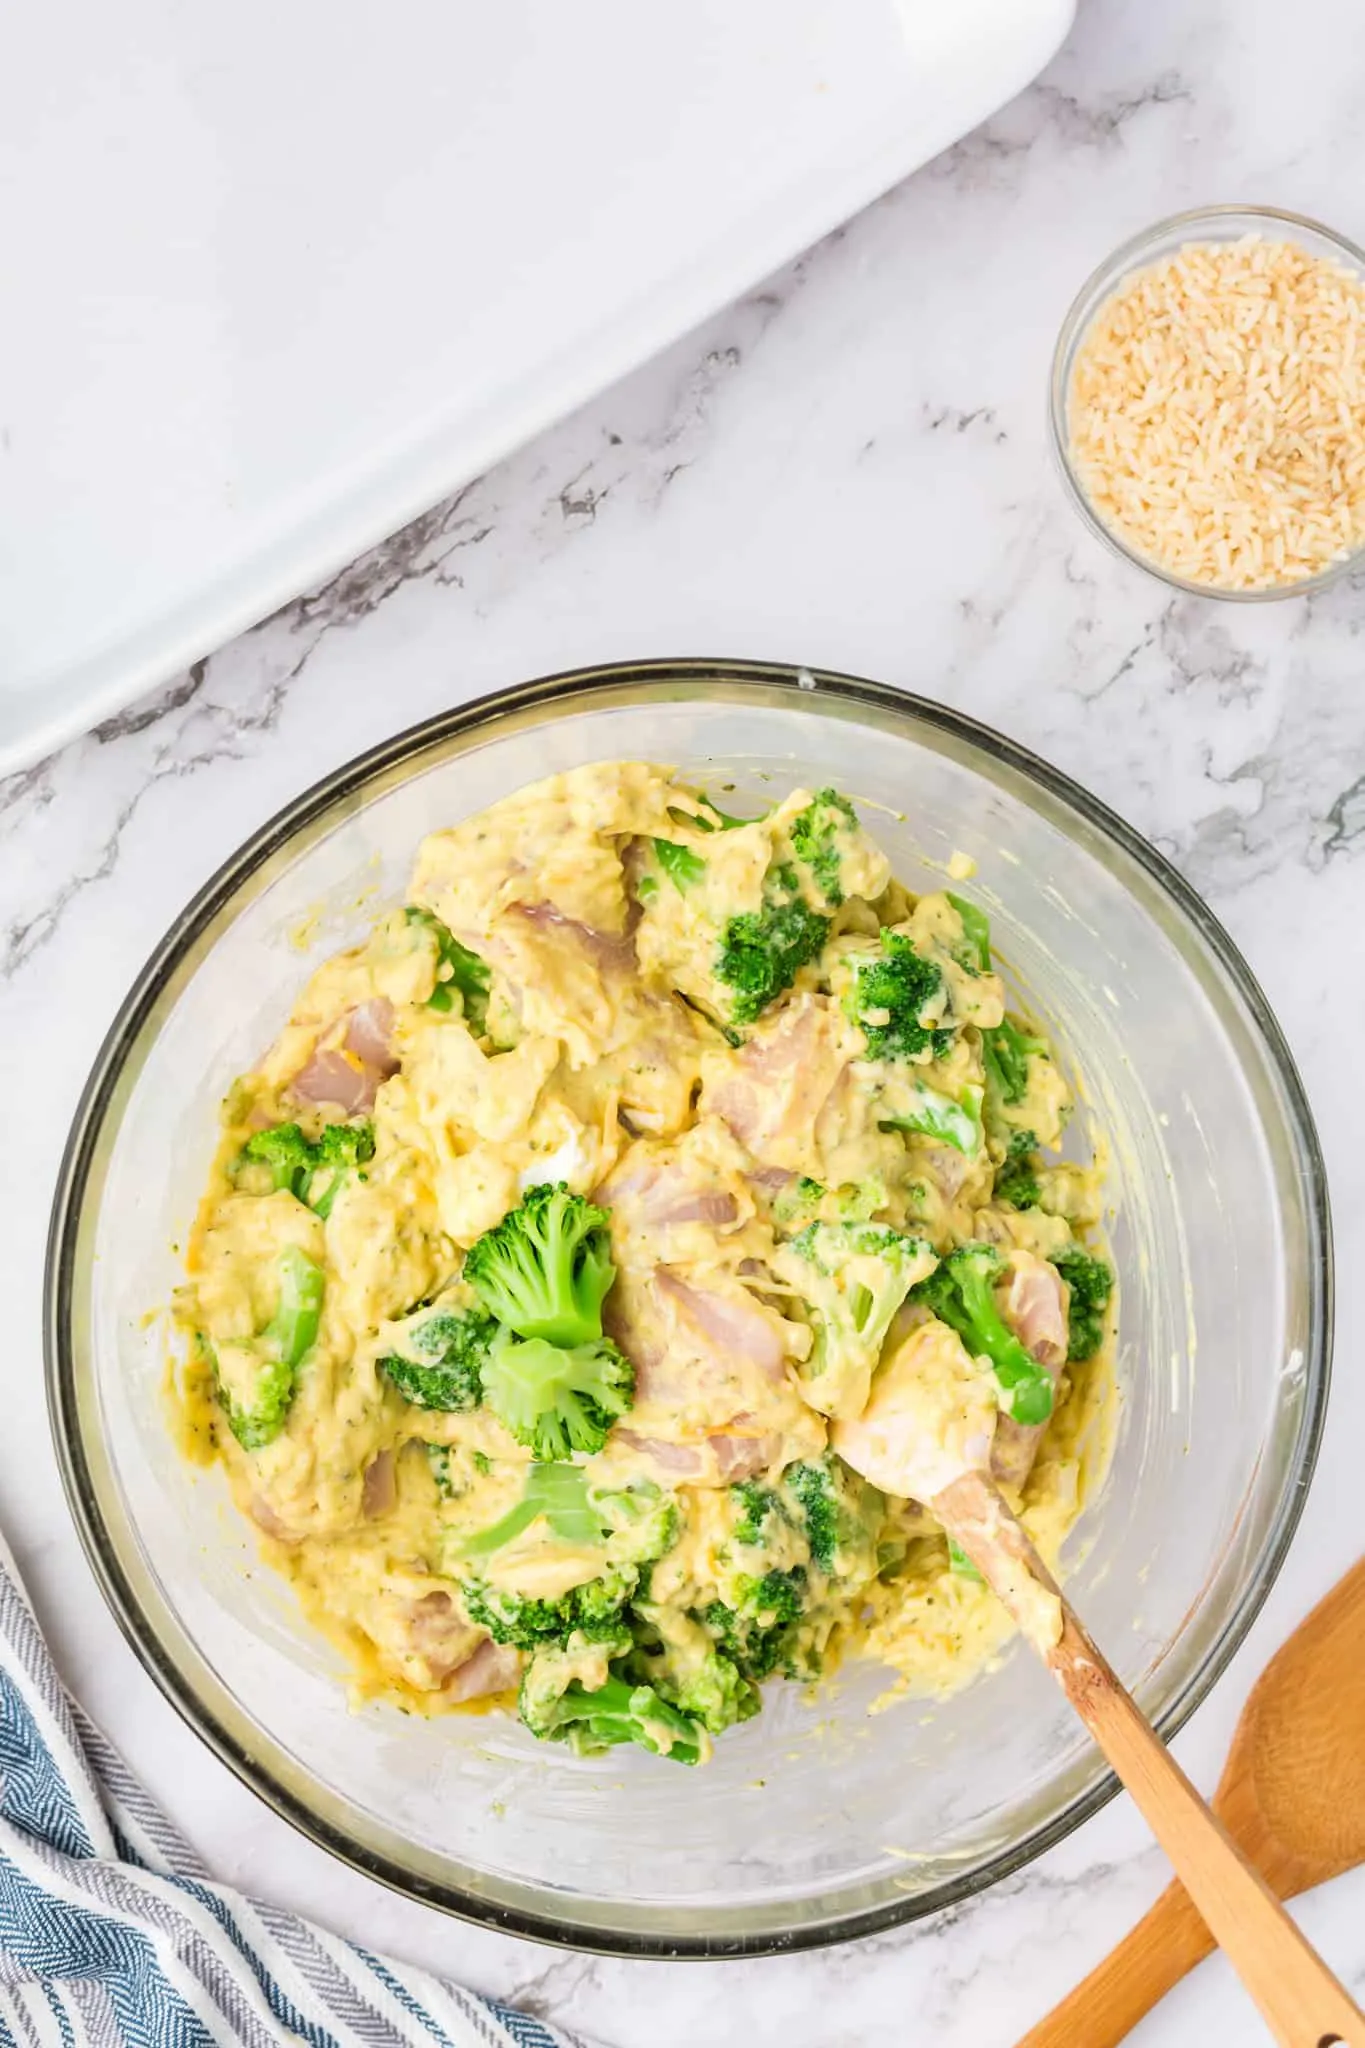 cheesy broccoli soup, chicken and broccoli florets in a bowl